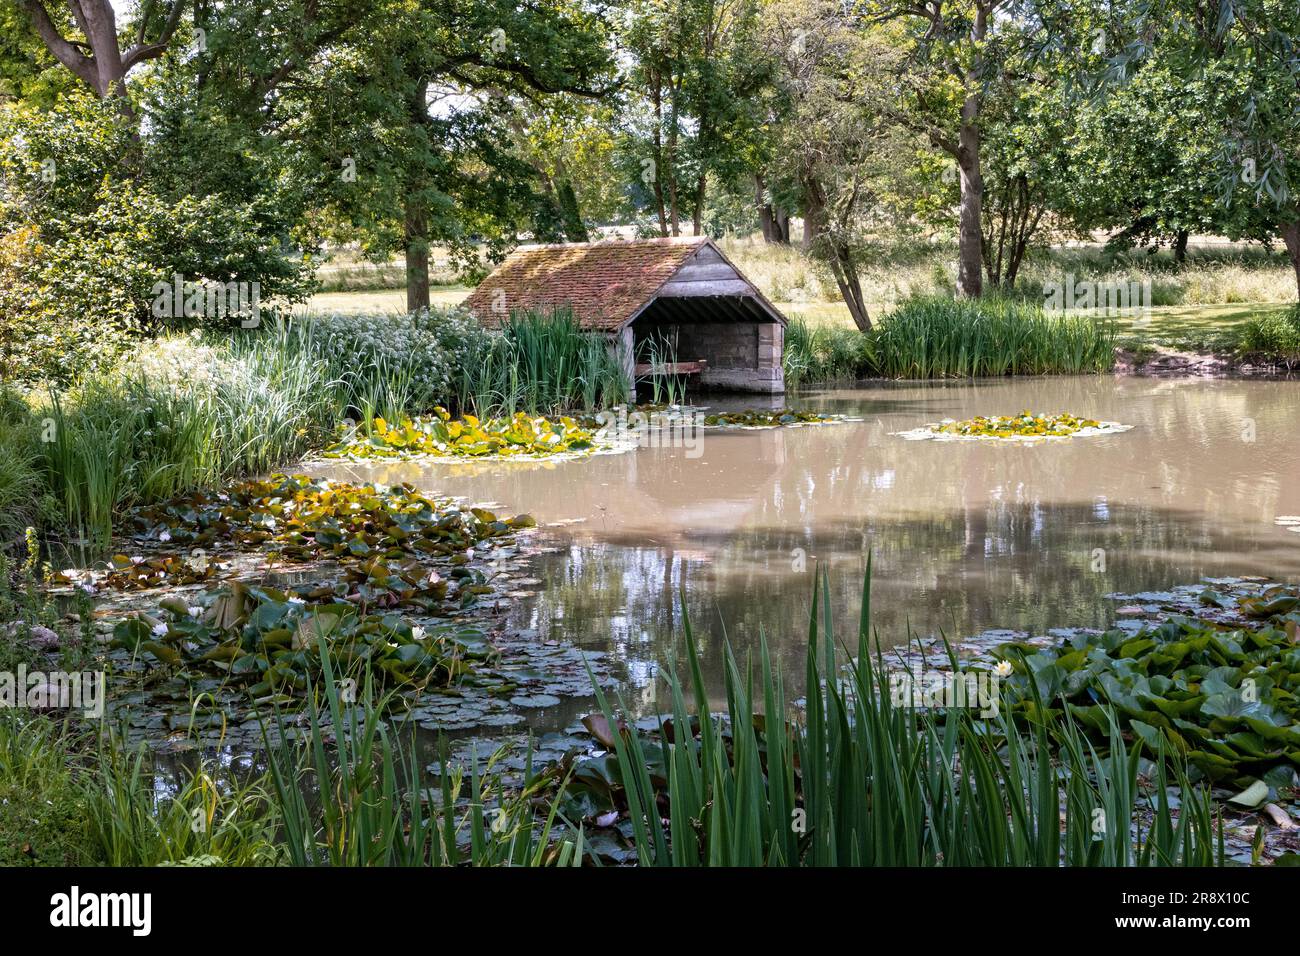 Boat house on a lake in an English country garden in summer Stock Photo